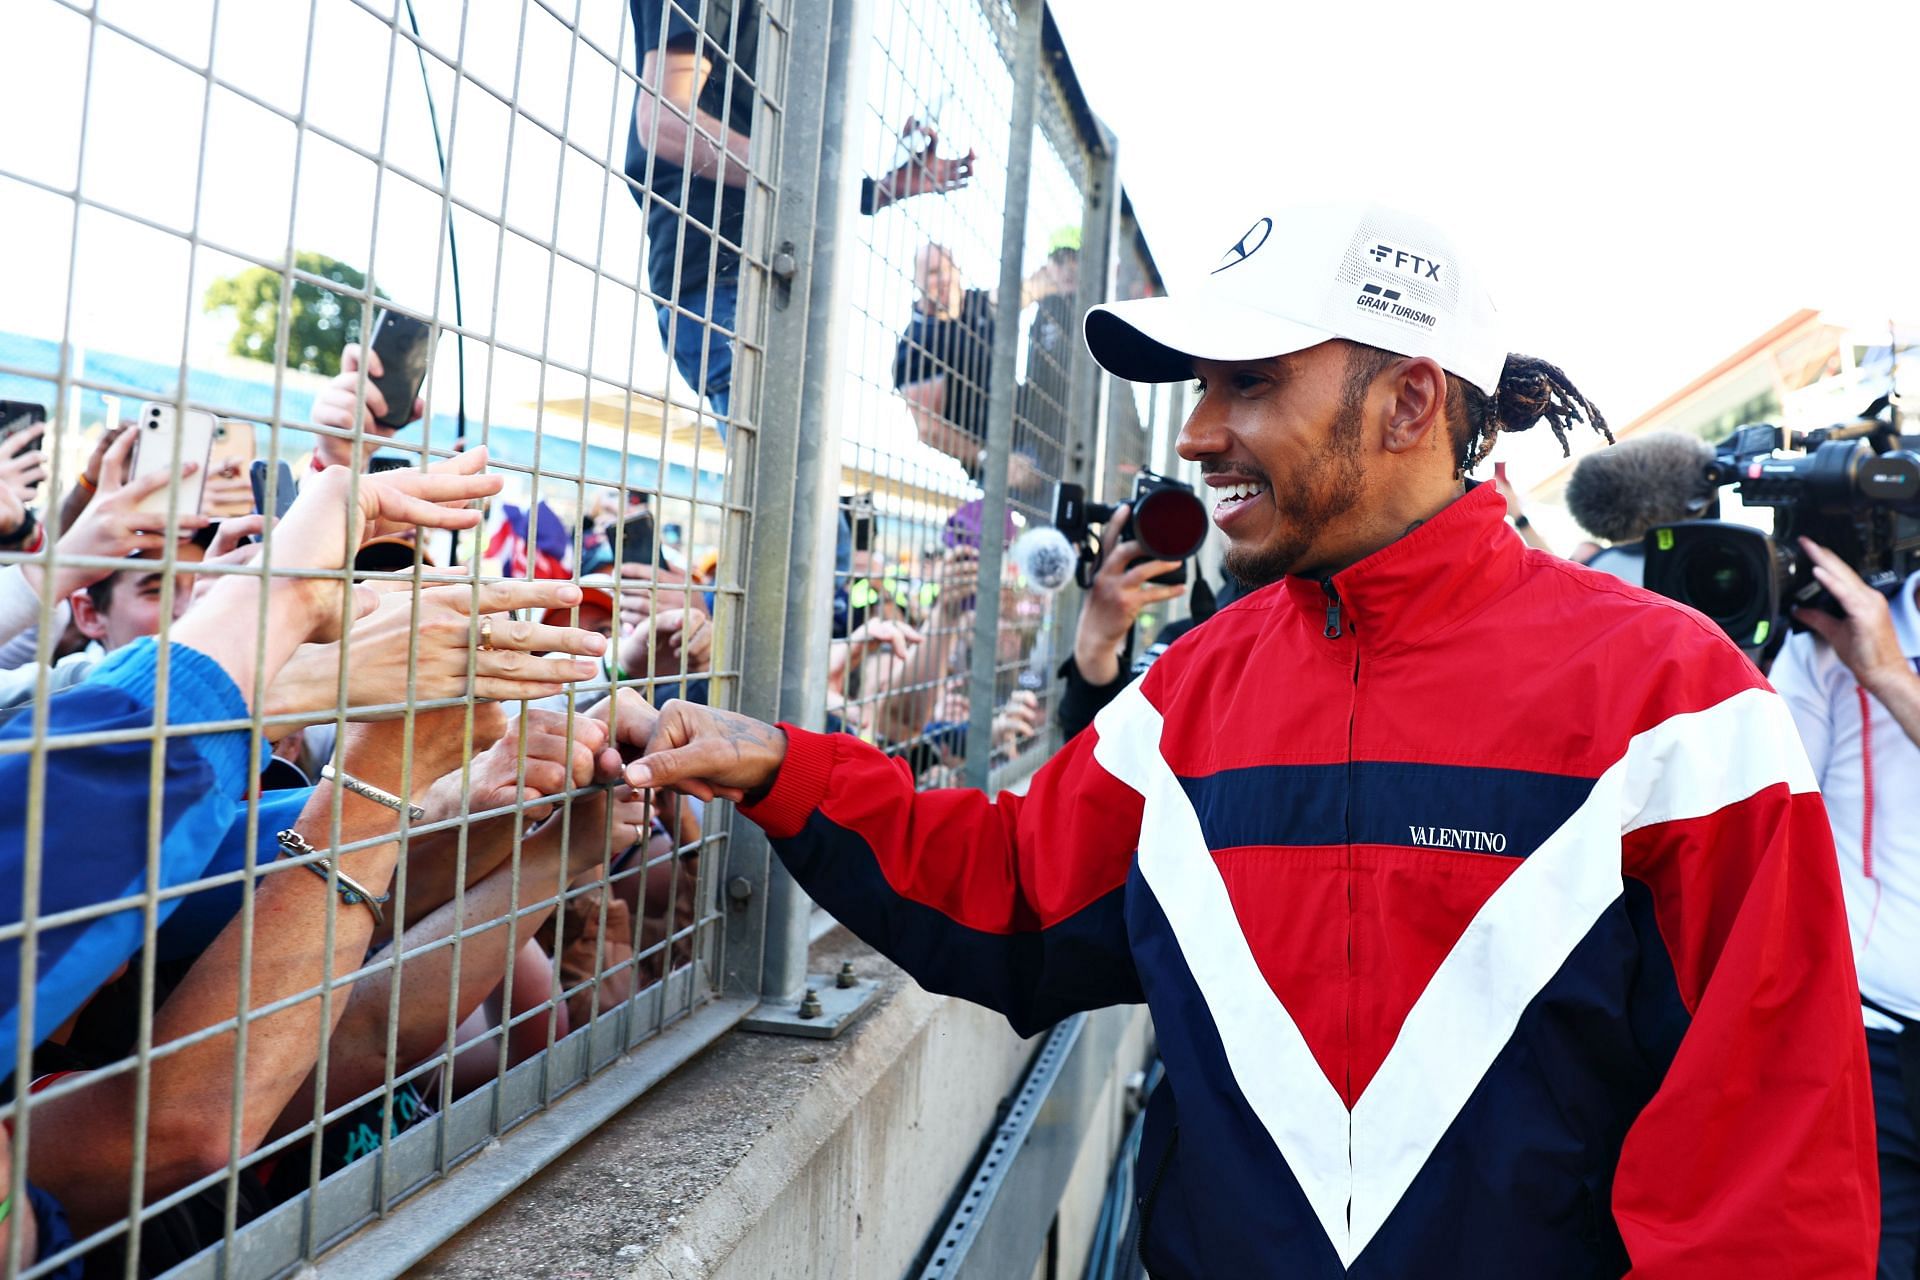 Lewis Hamilton has backtracked on his comments about anti-oil protests.